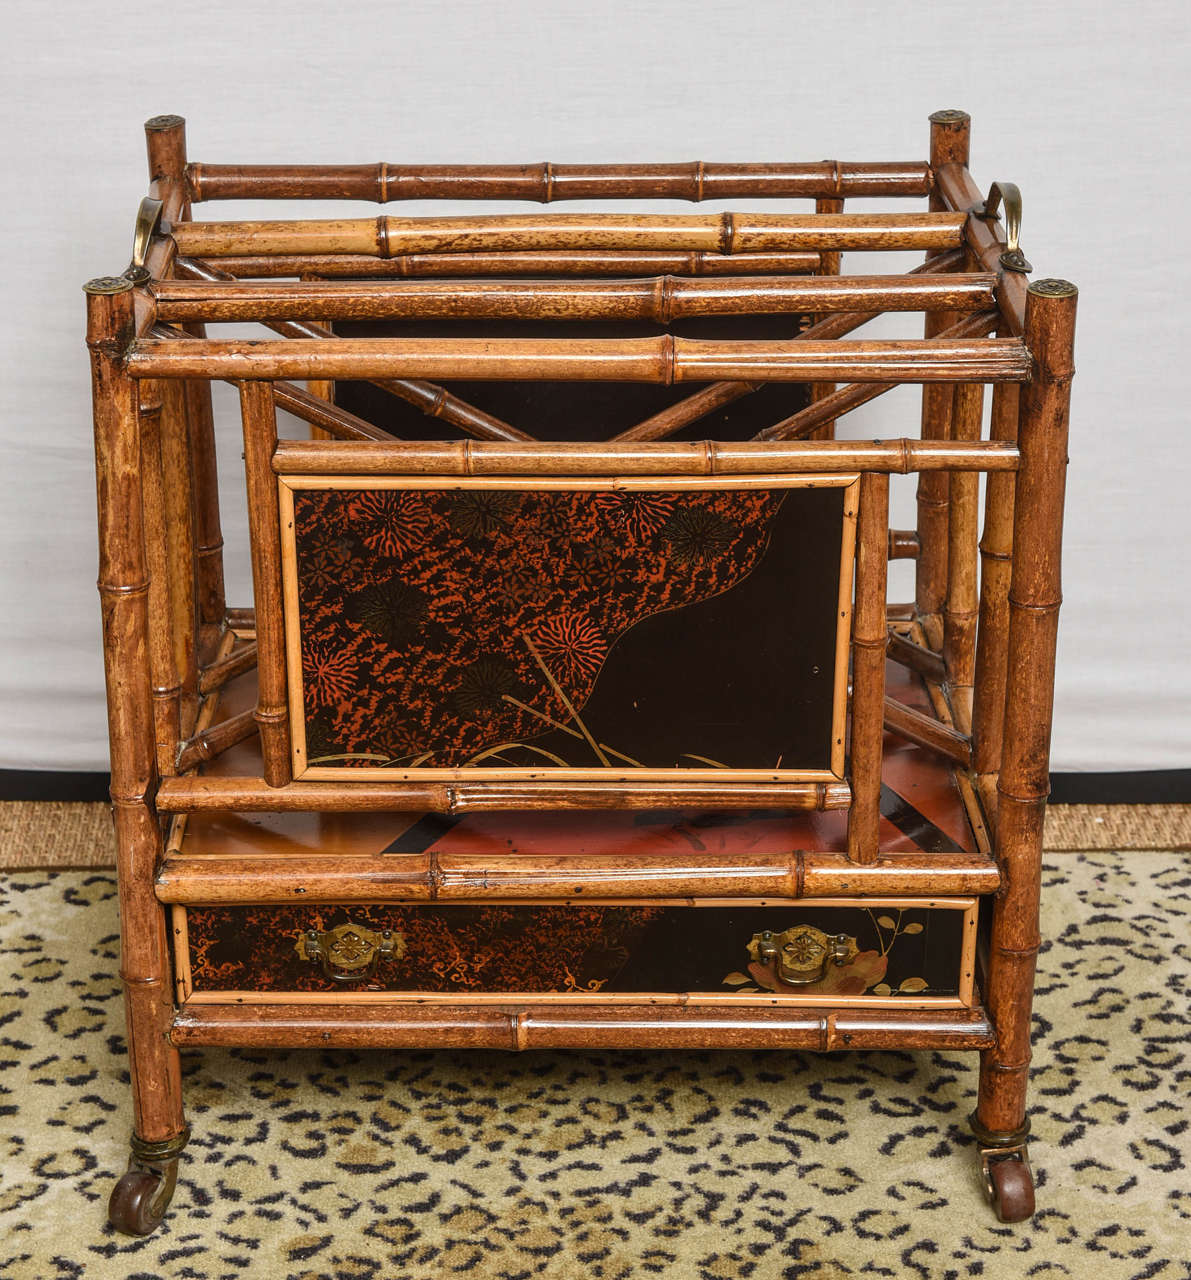 Rare 19th century English lacquer bamboo canterbury with handles and drawer on wheels.